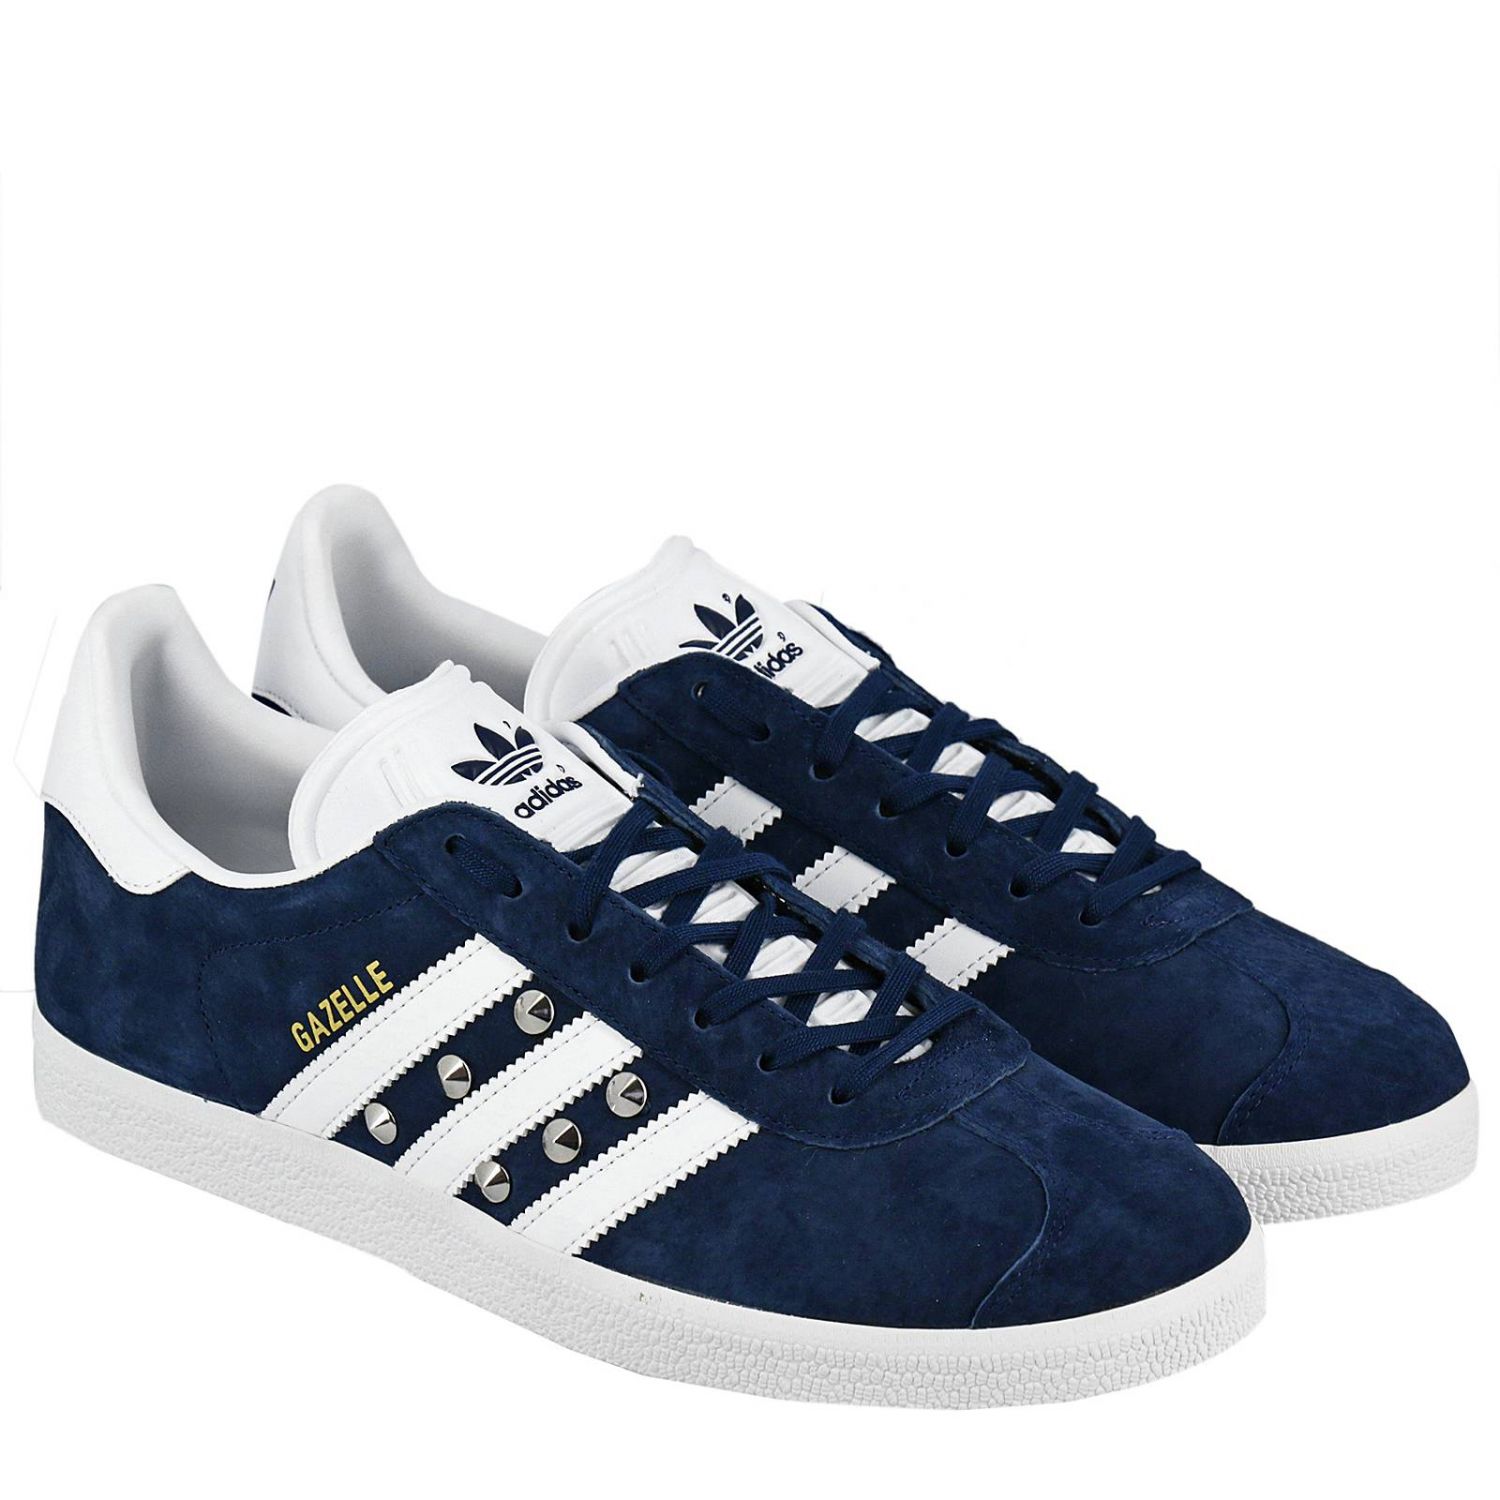 Adidas Project Customize Outlet: ADIDAS ORIGINALS GAZELLE PROJECT ...